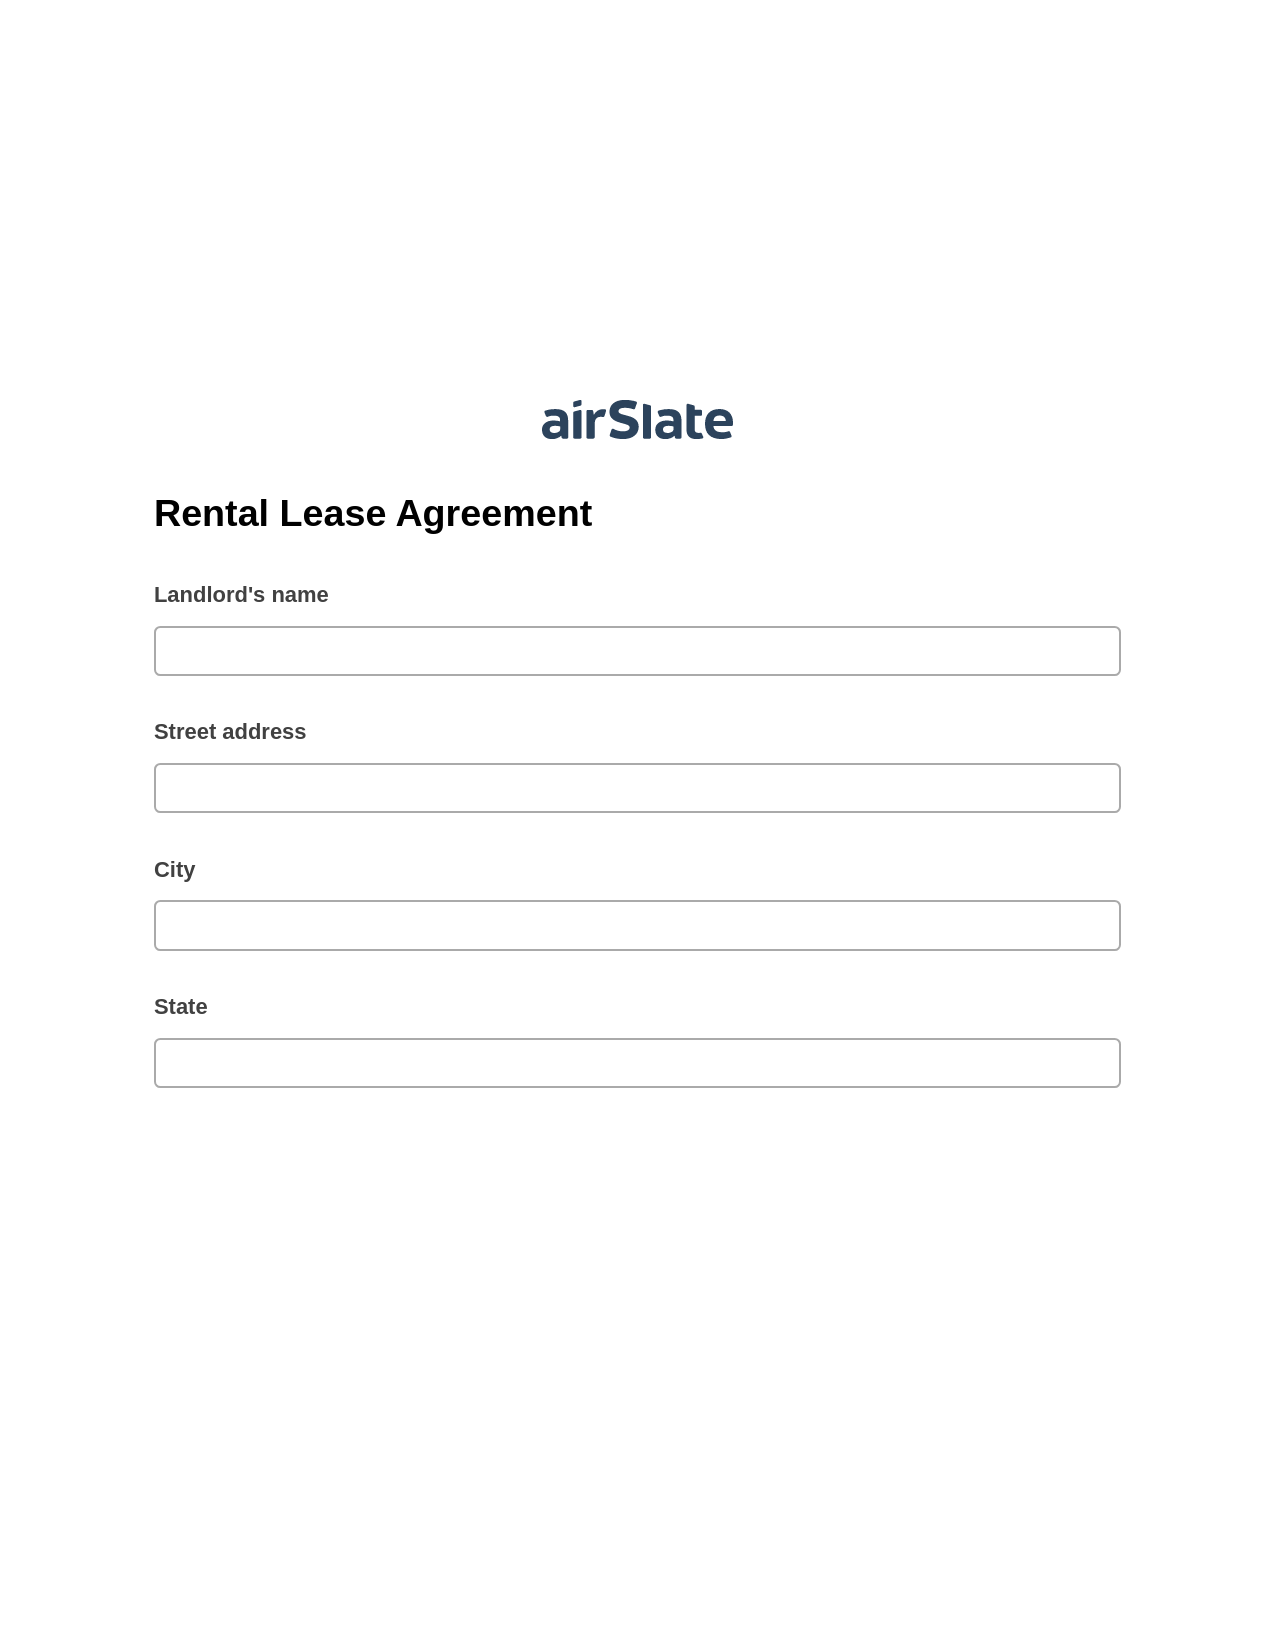 Rental Lease Agreement Pre-fill from CSV File Bot, Lock the slate bot, Email Notification Postfinish Bot